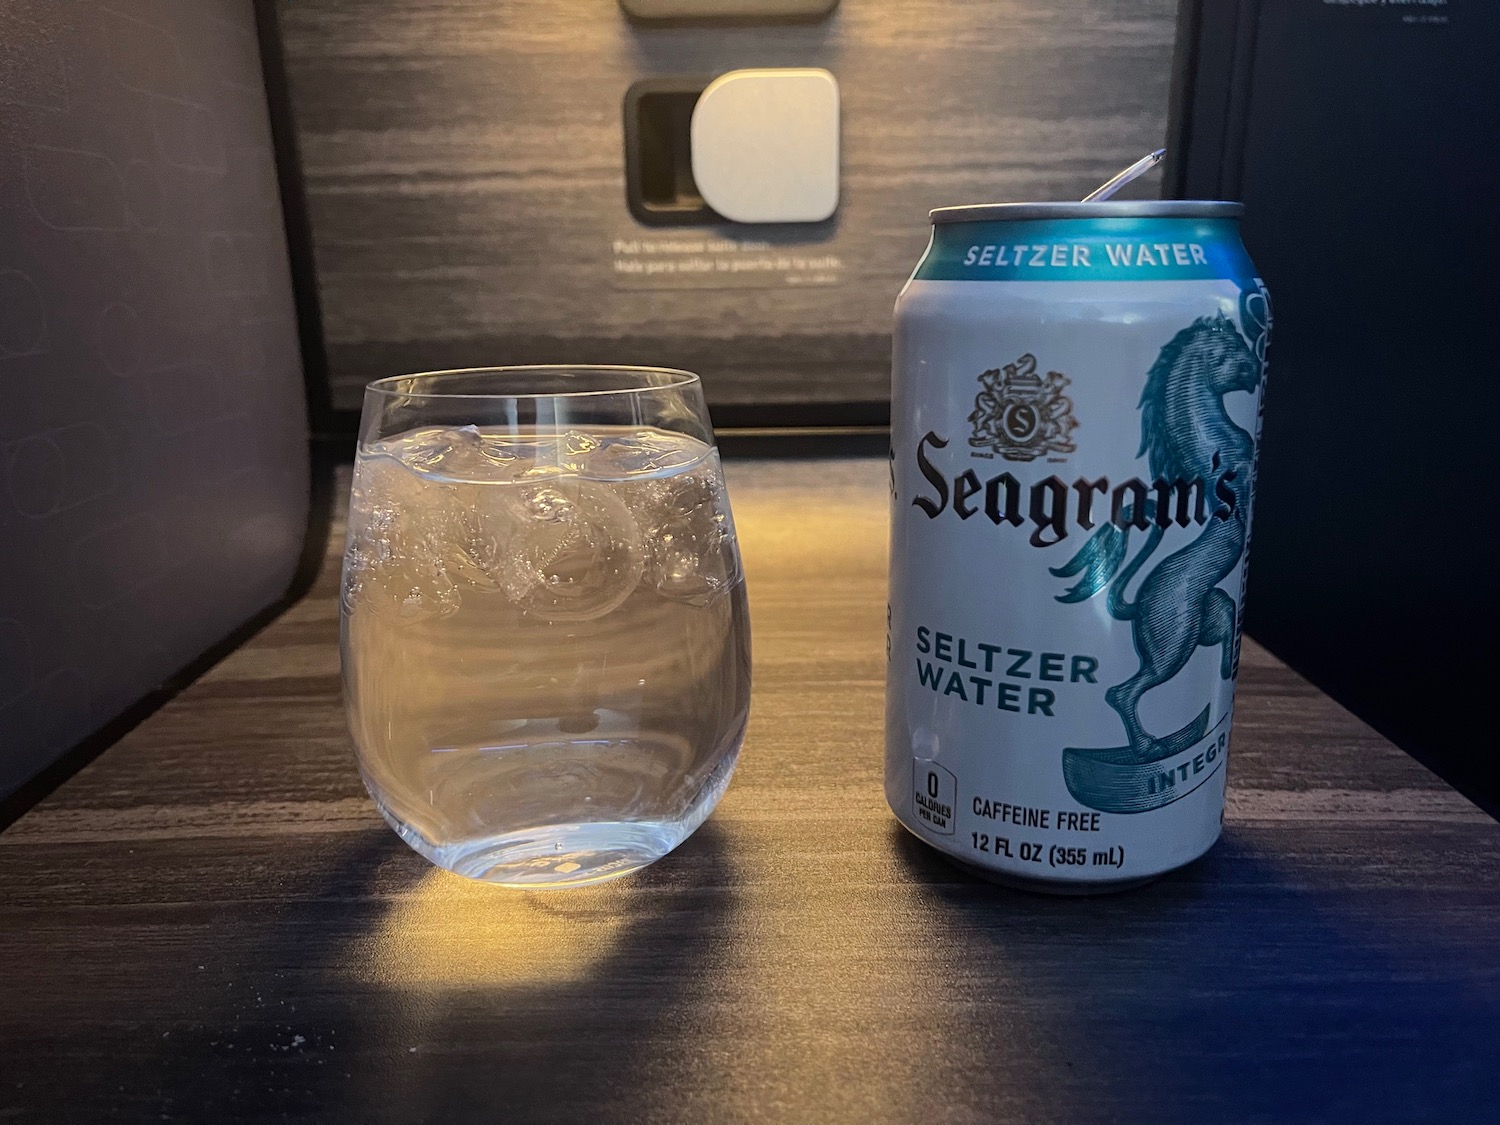 a can of water next to a glass of water